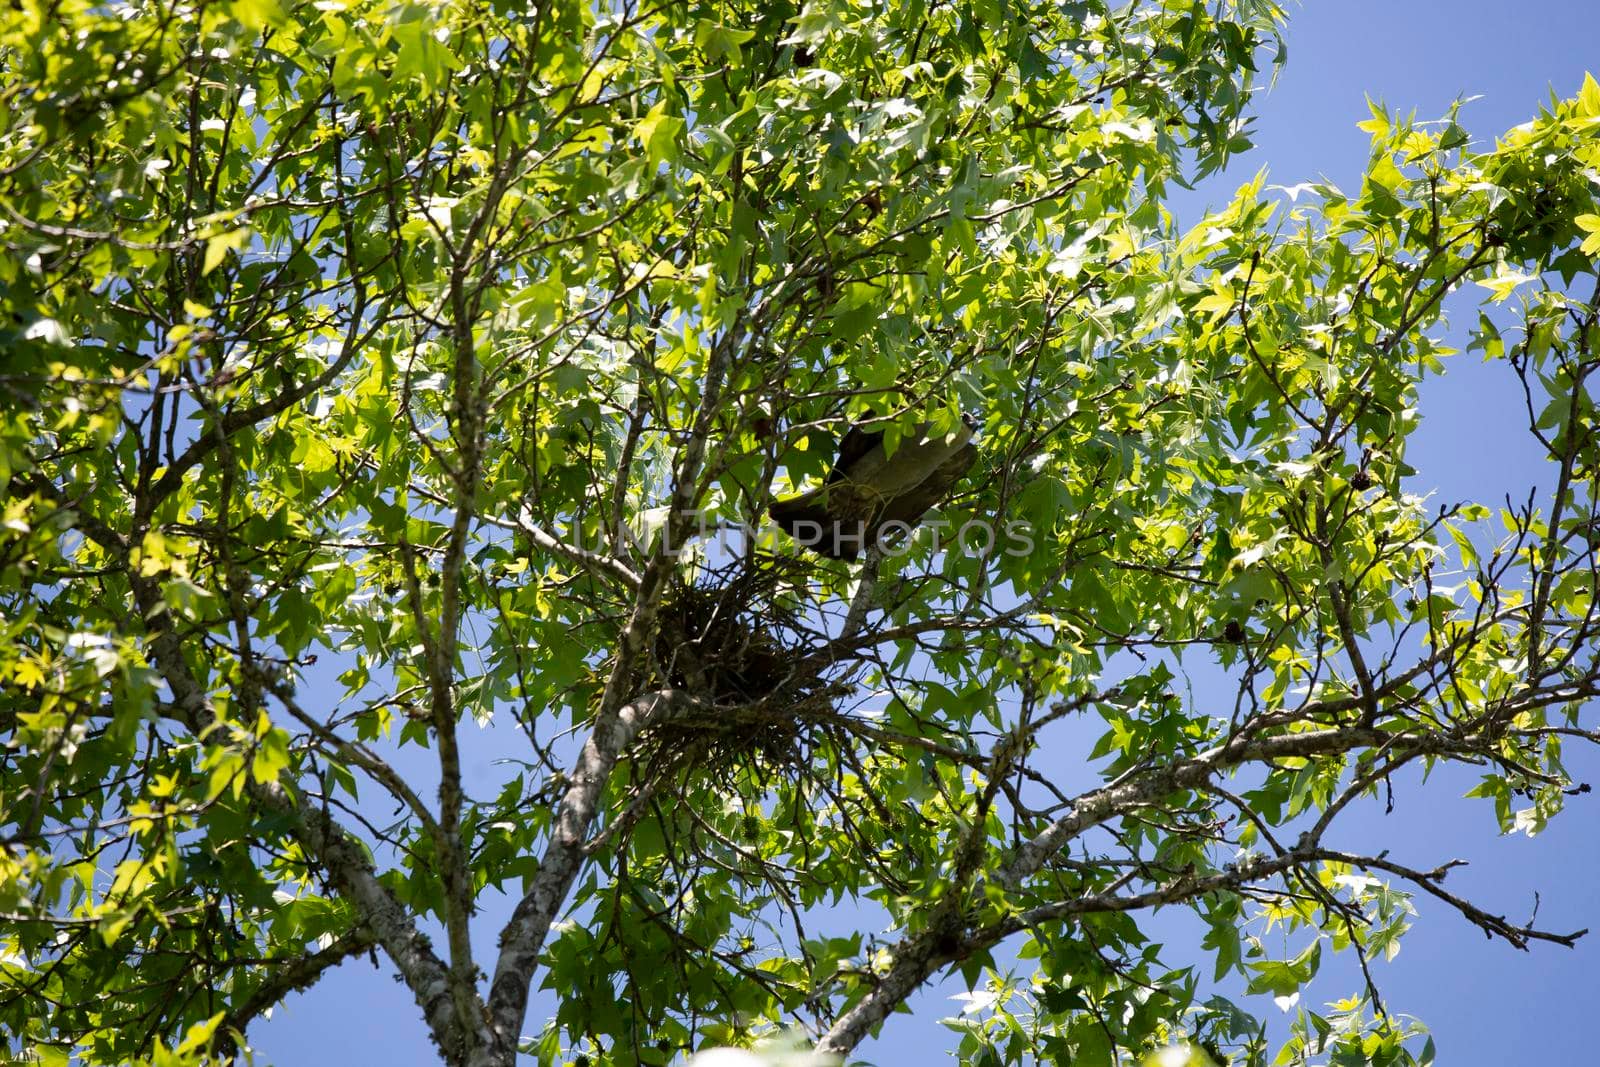 Mississippi Kite Flying from Its Nest by tornado98